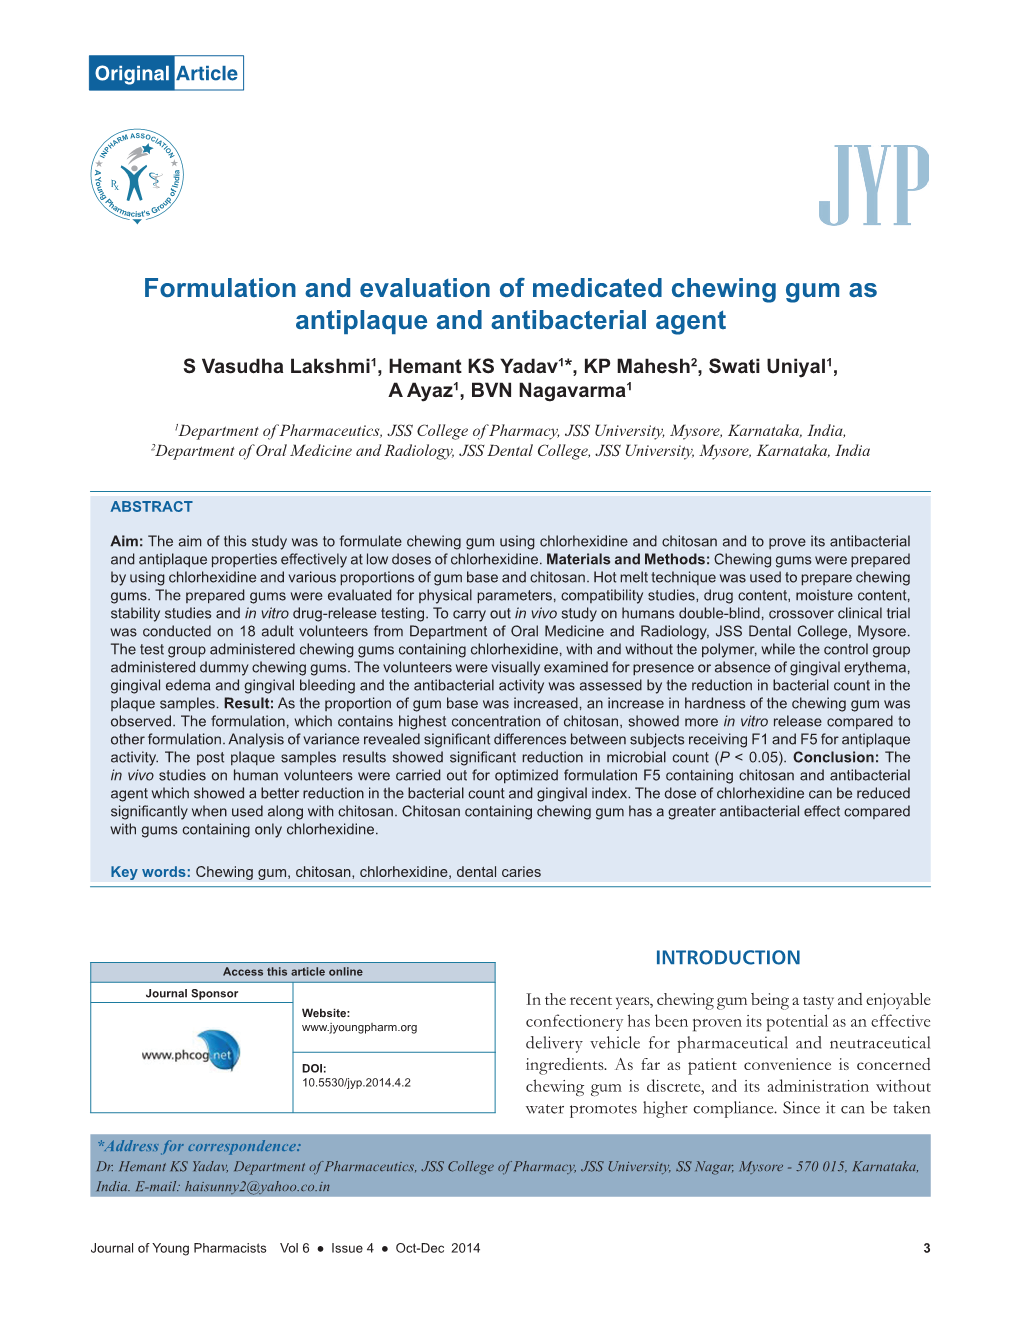 Formulation and Evaluation of Medicated Chewing Gum As Antiplaque and Antibacterial Agent